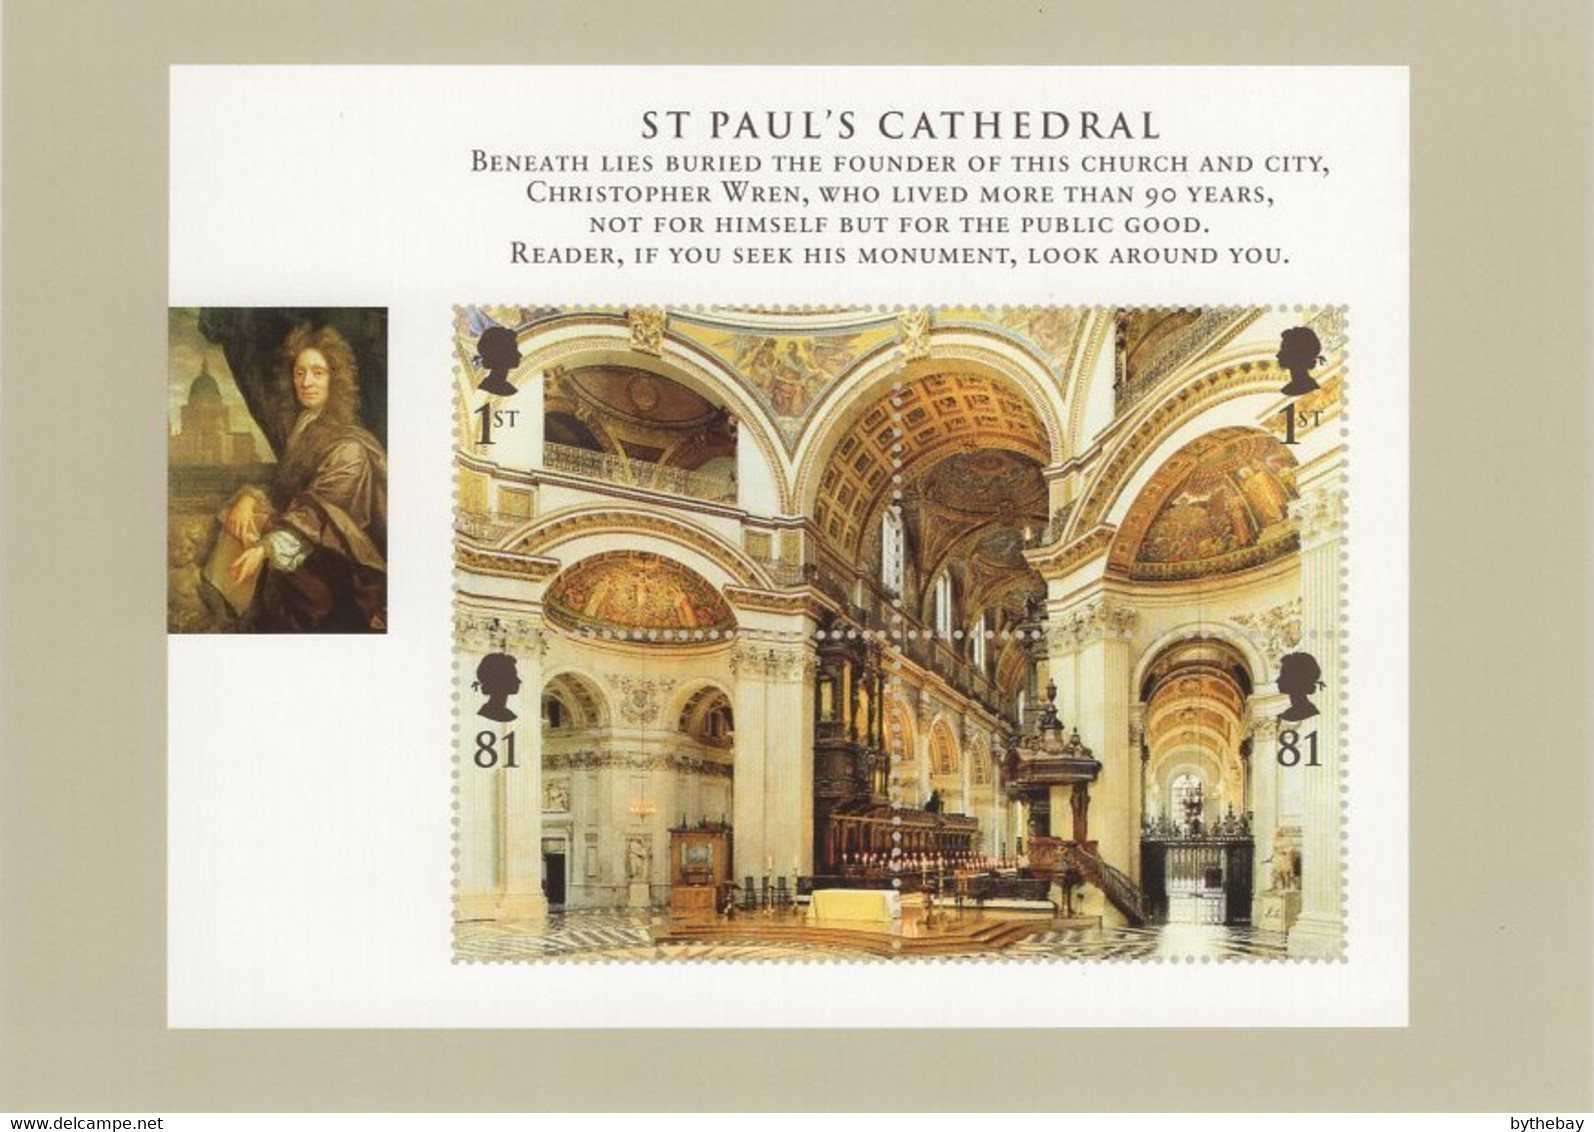 Great Britain 2008 PHQ Card Sc 2580 Interior Of St. Paul's Cathedral - PHQ Cards